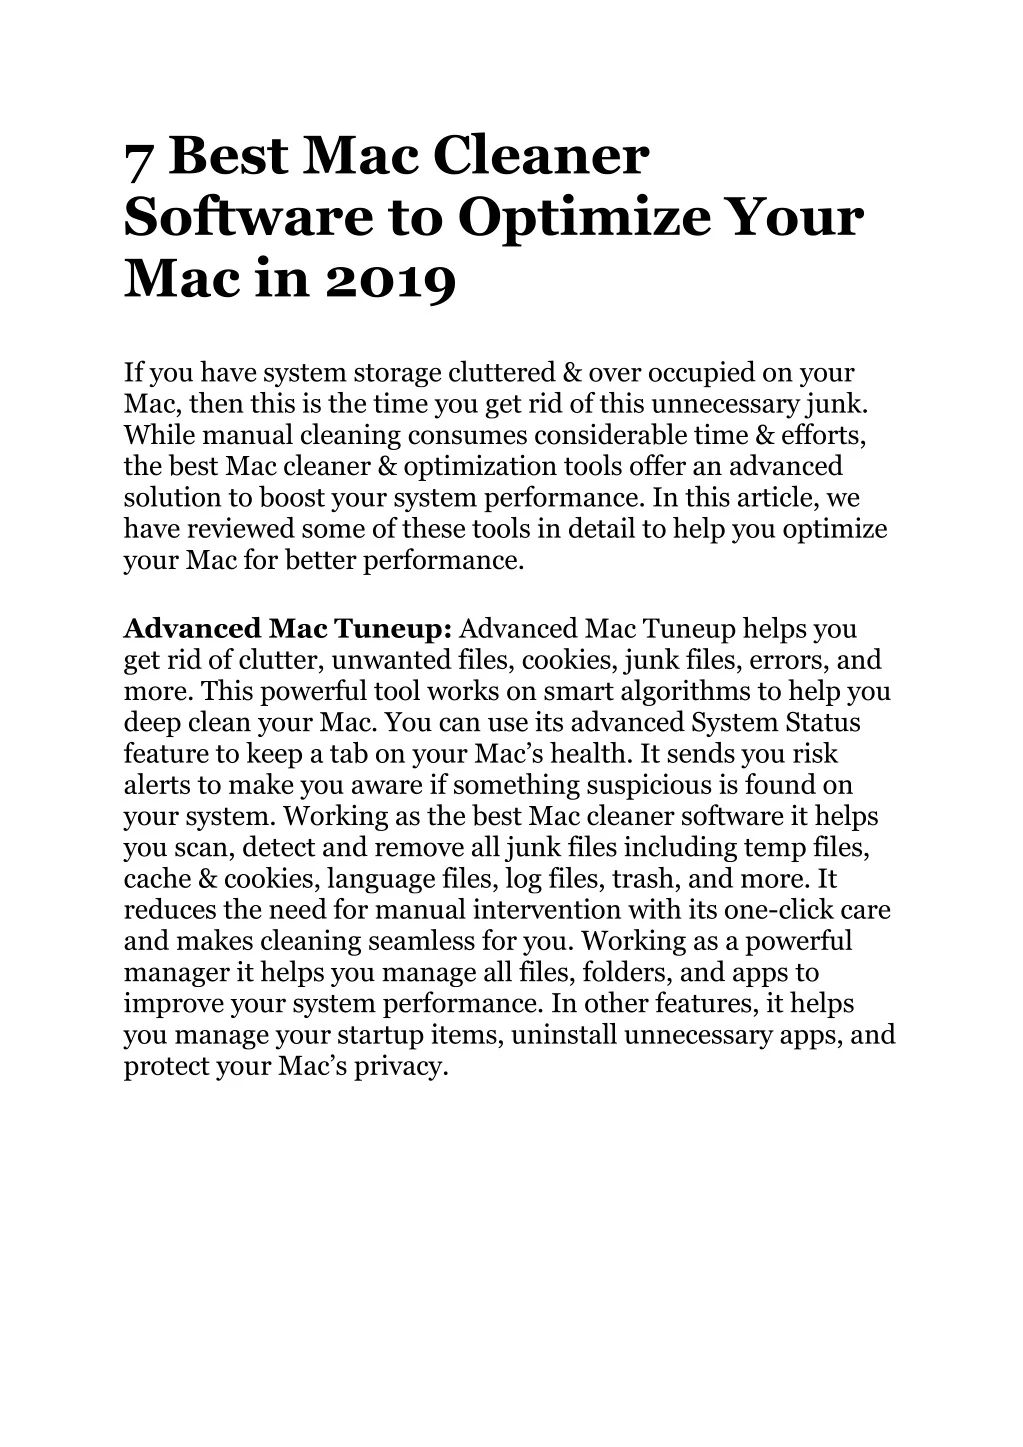 7 best mac cleaner software to optimize your